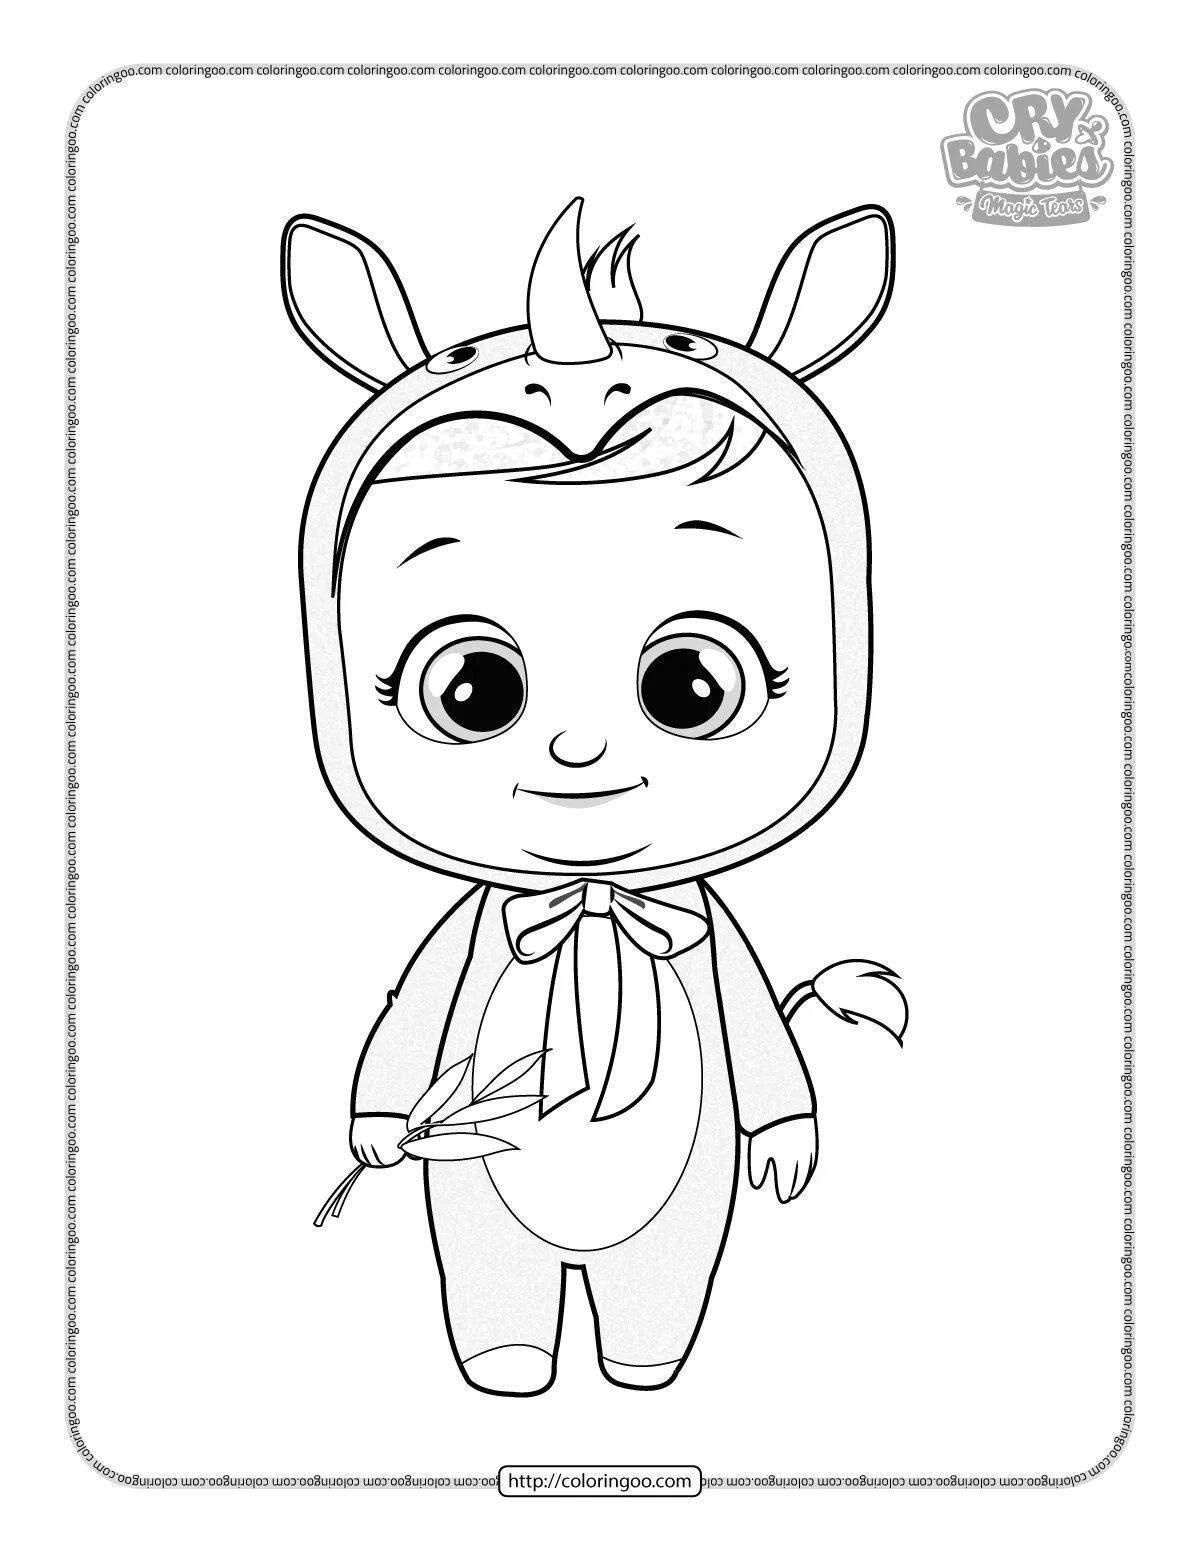 Cute baby's edge coloring book for kids